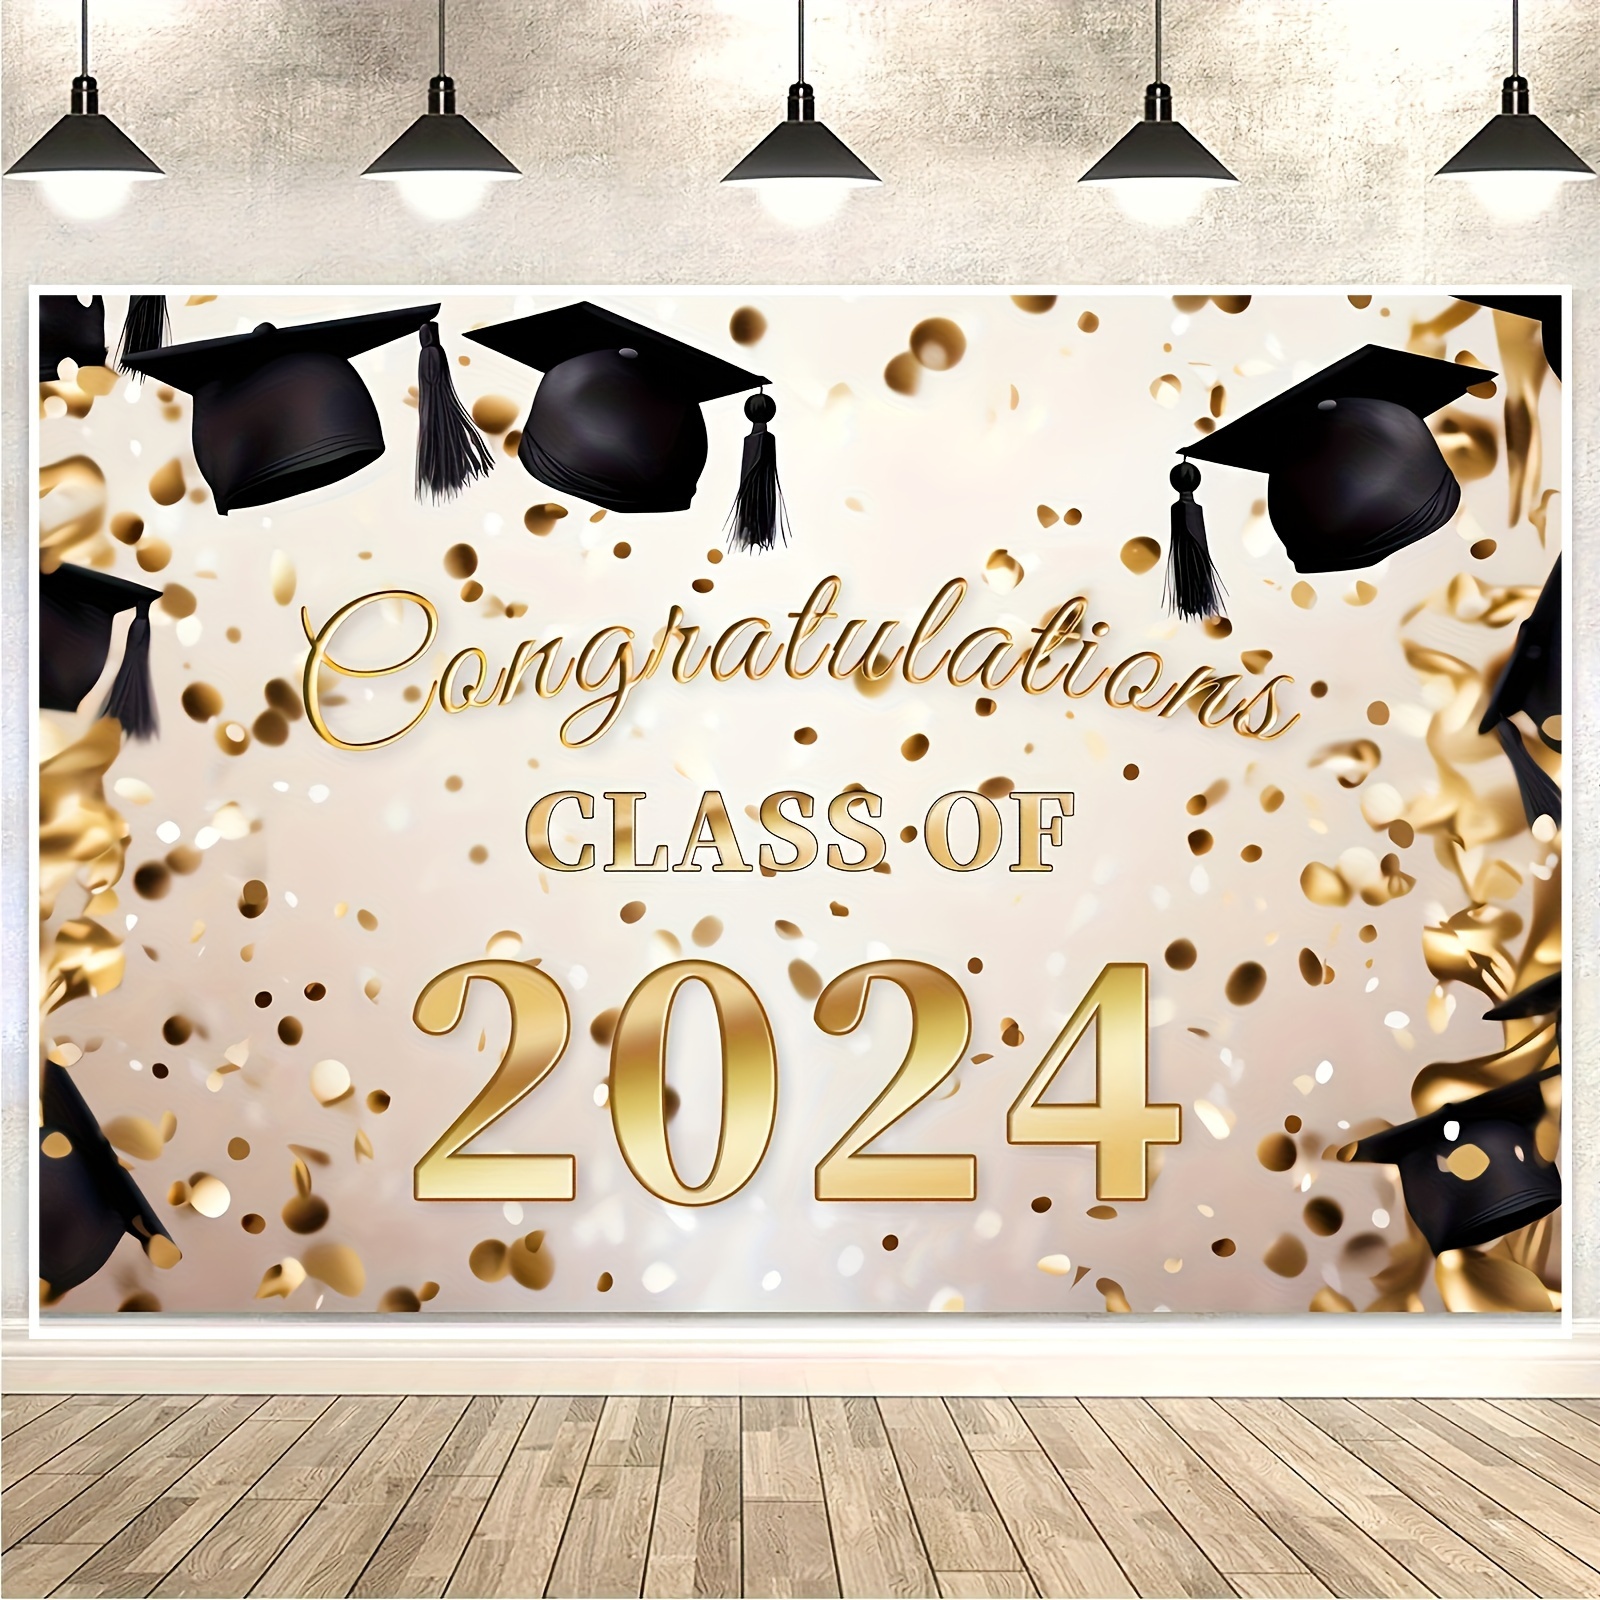 

1pc, Class Of 2024 Graduation Backdrop - Black Golden Glitter - Large Party Background - Congrats Grad Banner - Photo Booth Props